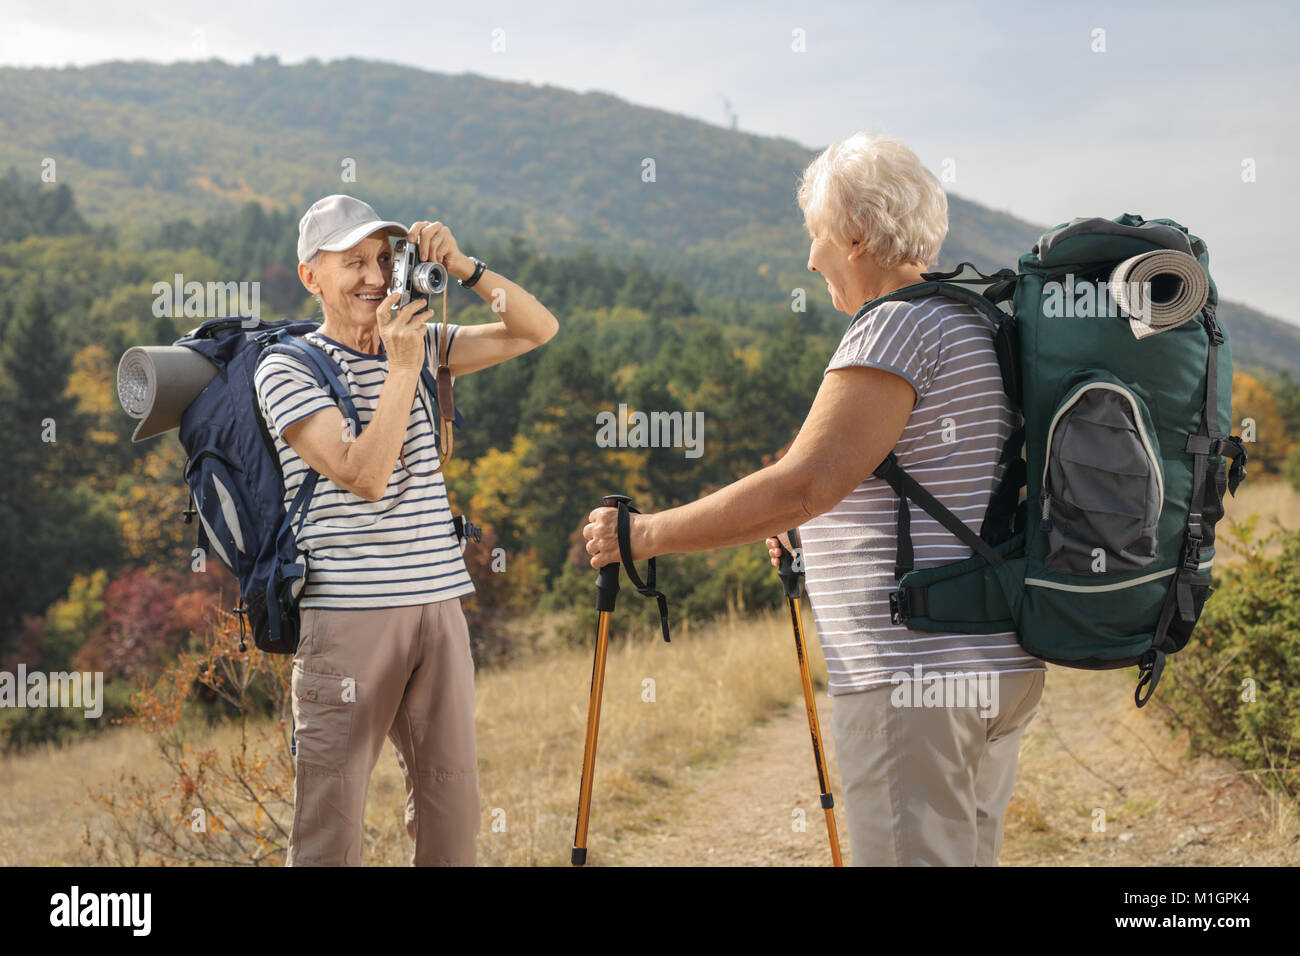 Elderly male hiker taking a picture of an elderly female hiker outdoors Stock Photo